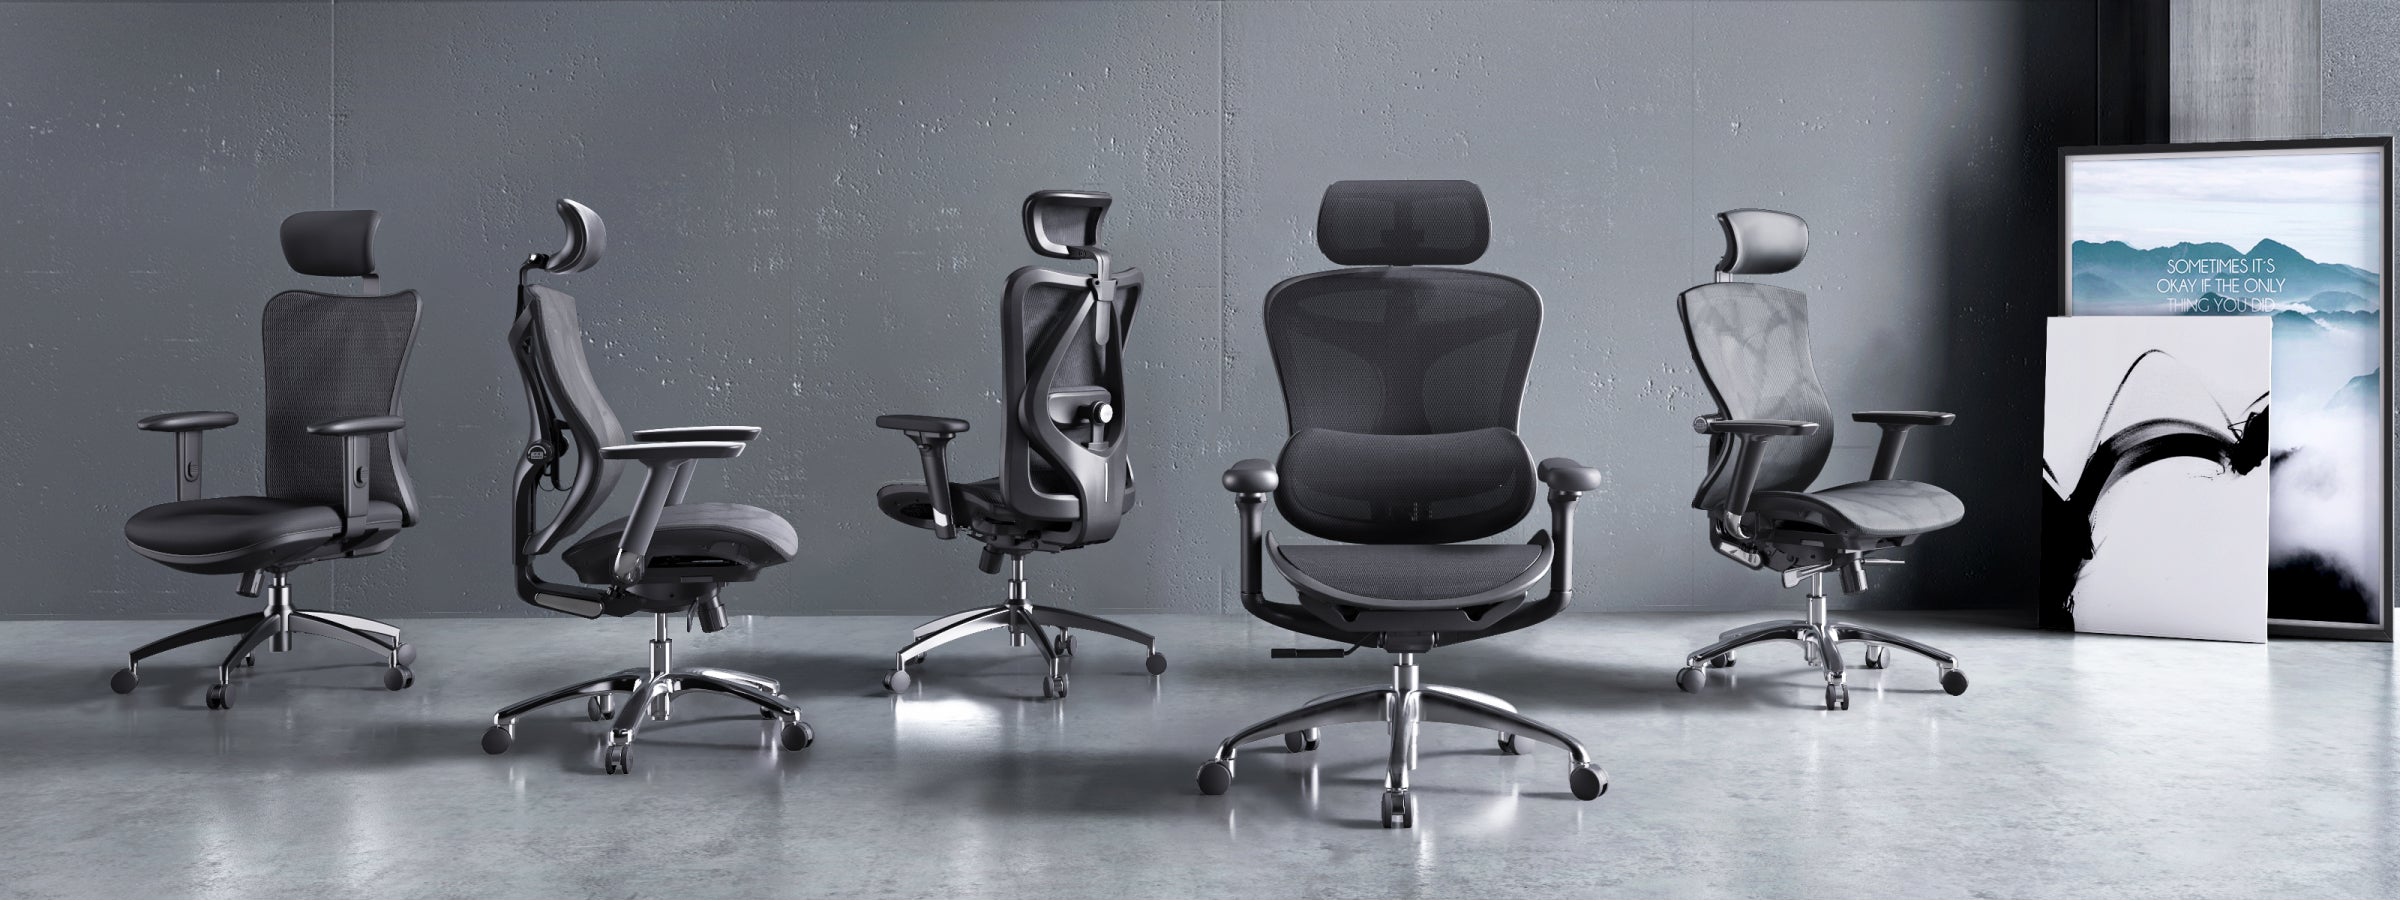 Sihoo M18 Classic Office Chair With Triple Spinal Relief